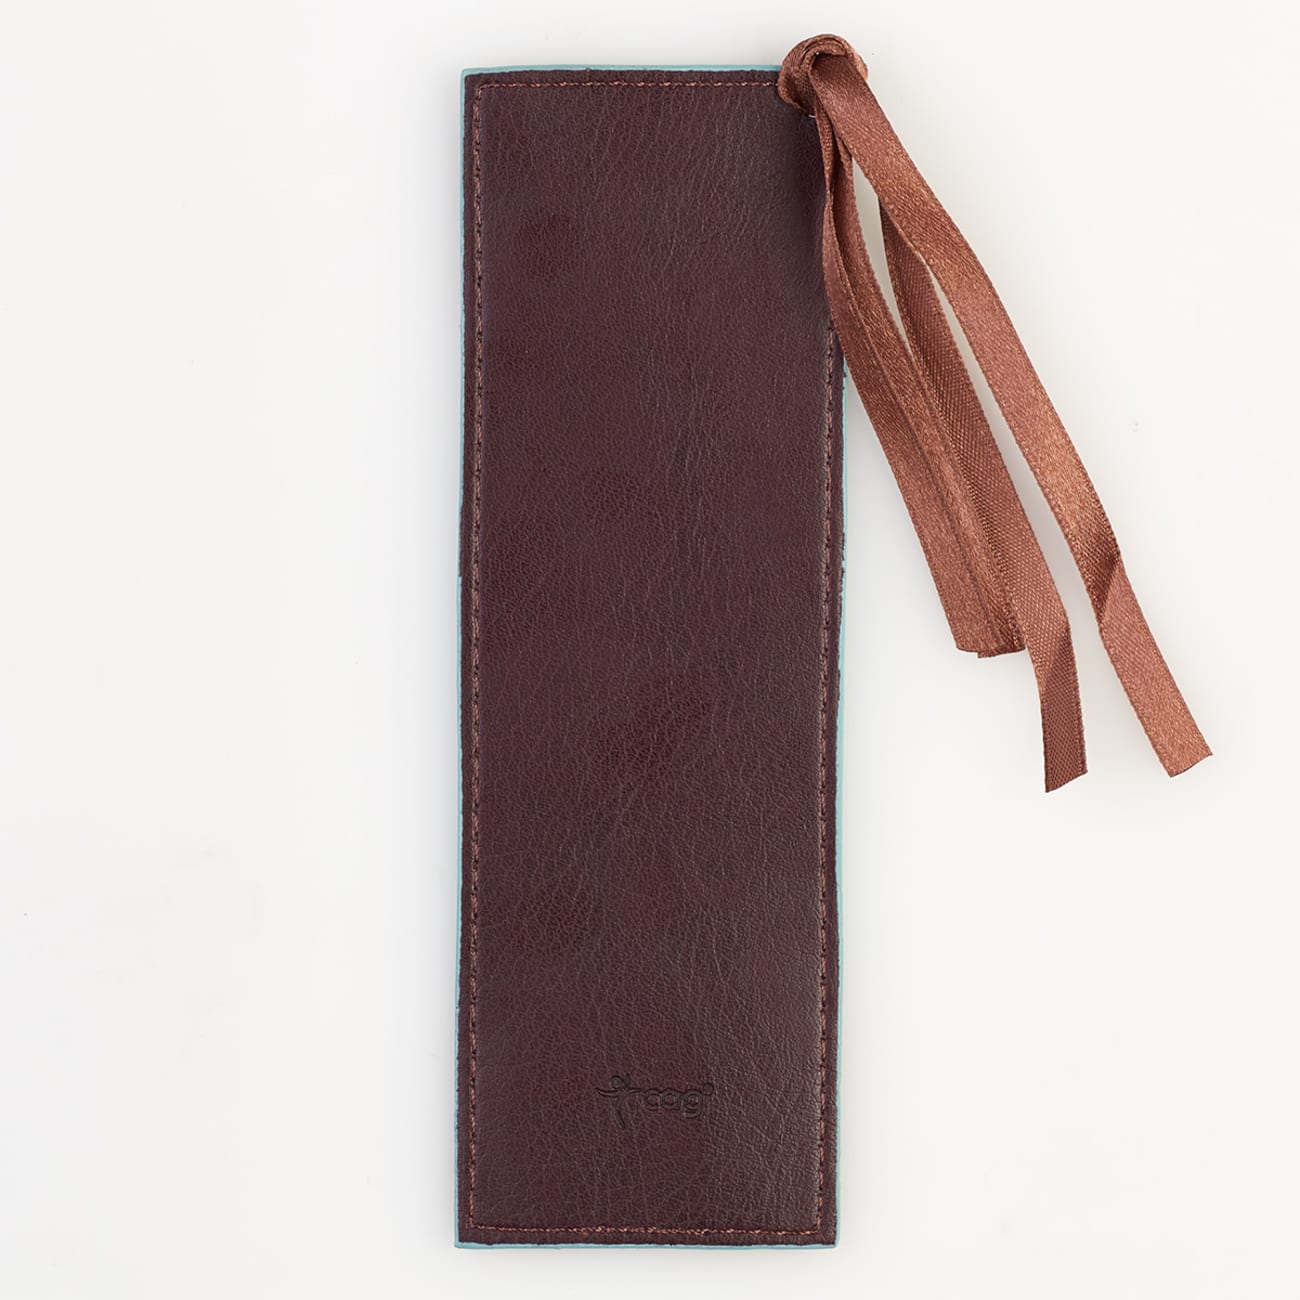 Bookmark: Be Still and Know That I Am God Luxleather Imitation Leather